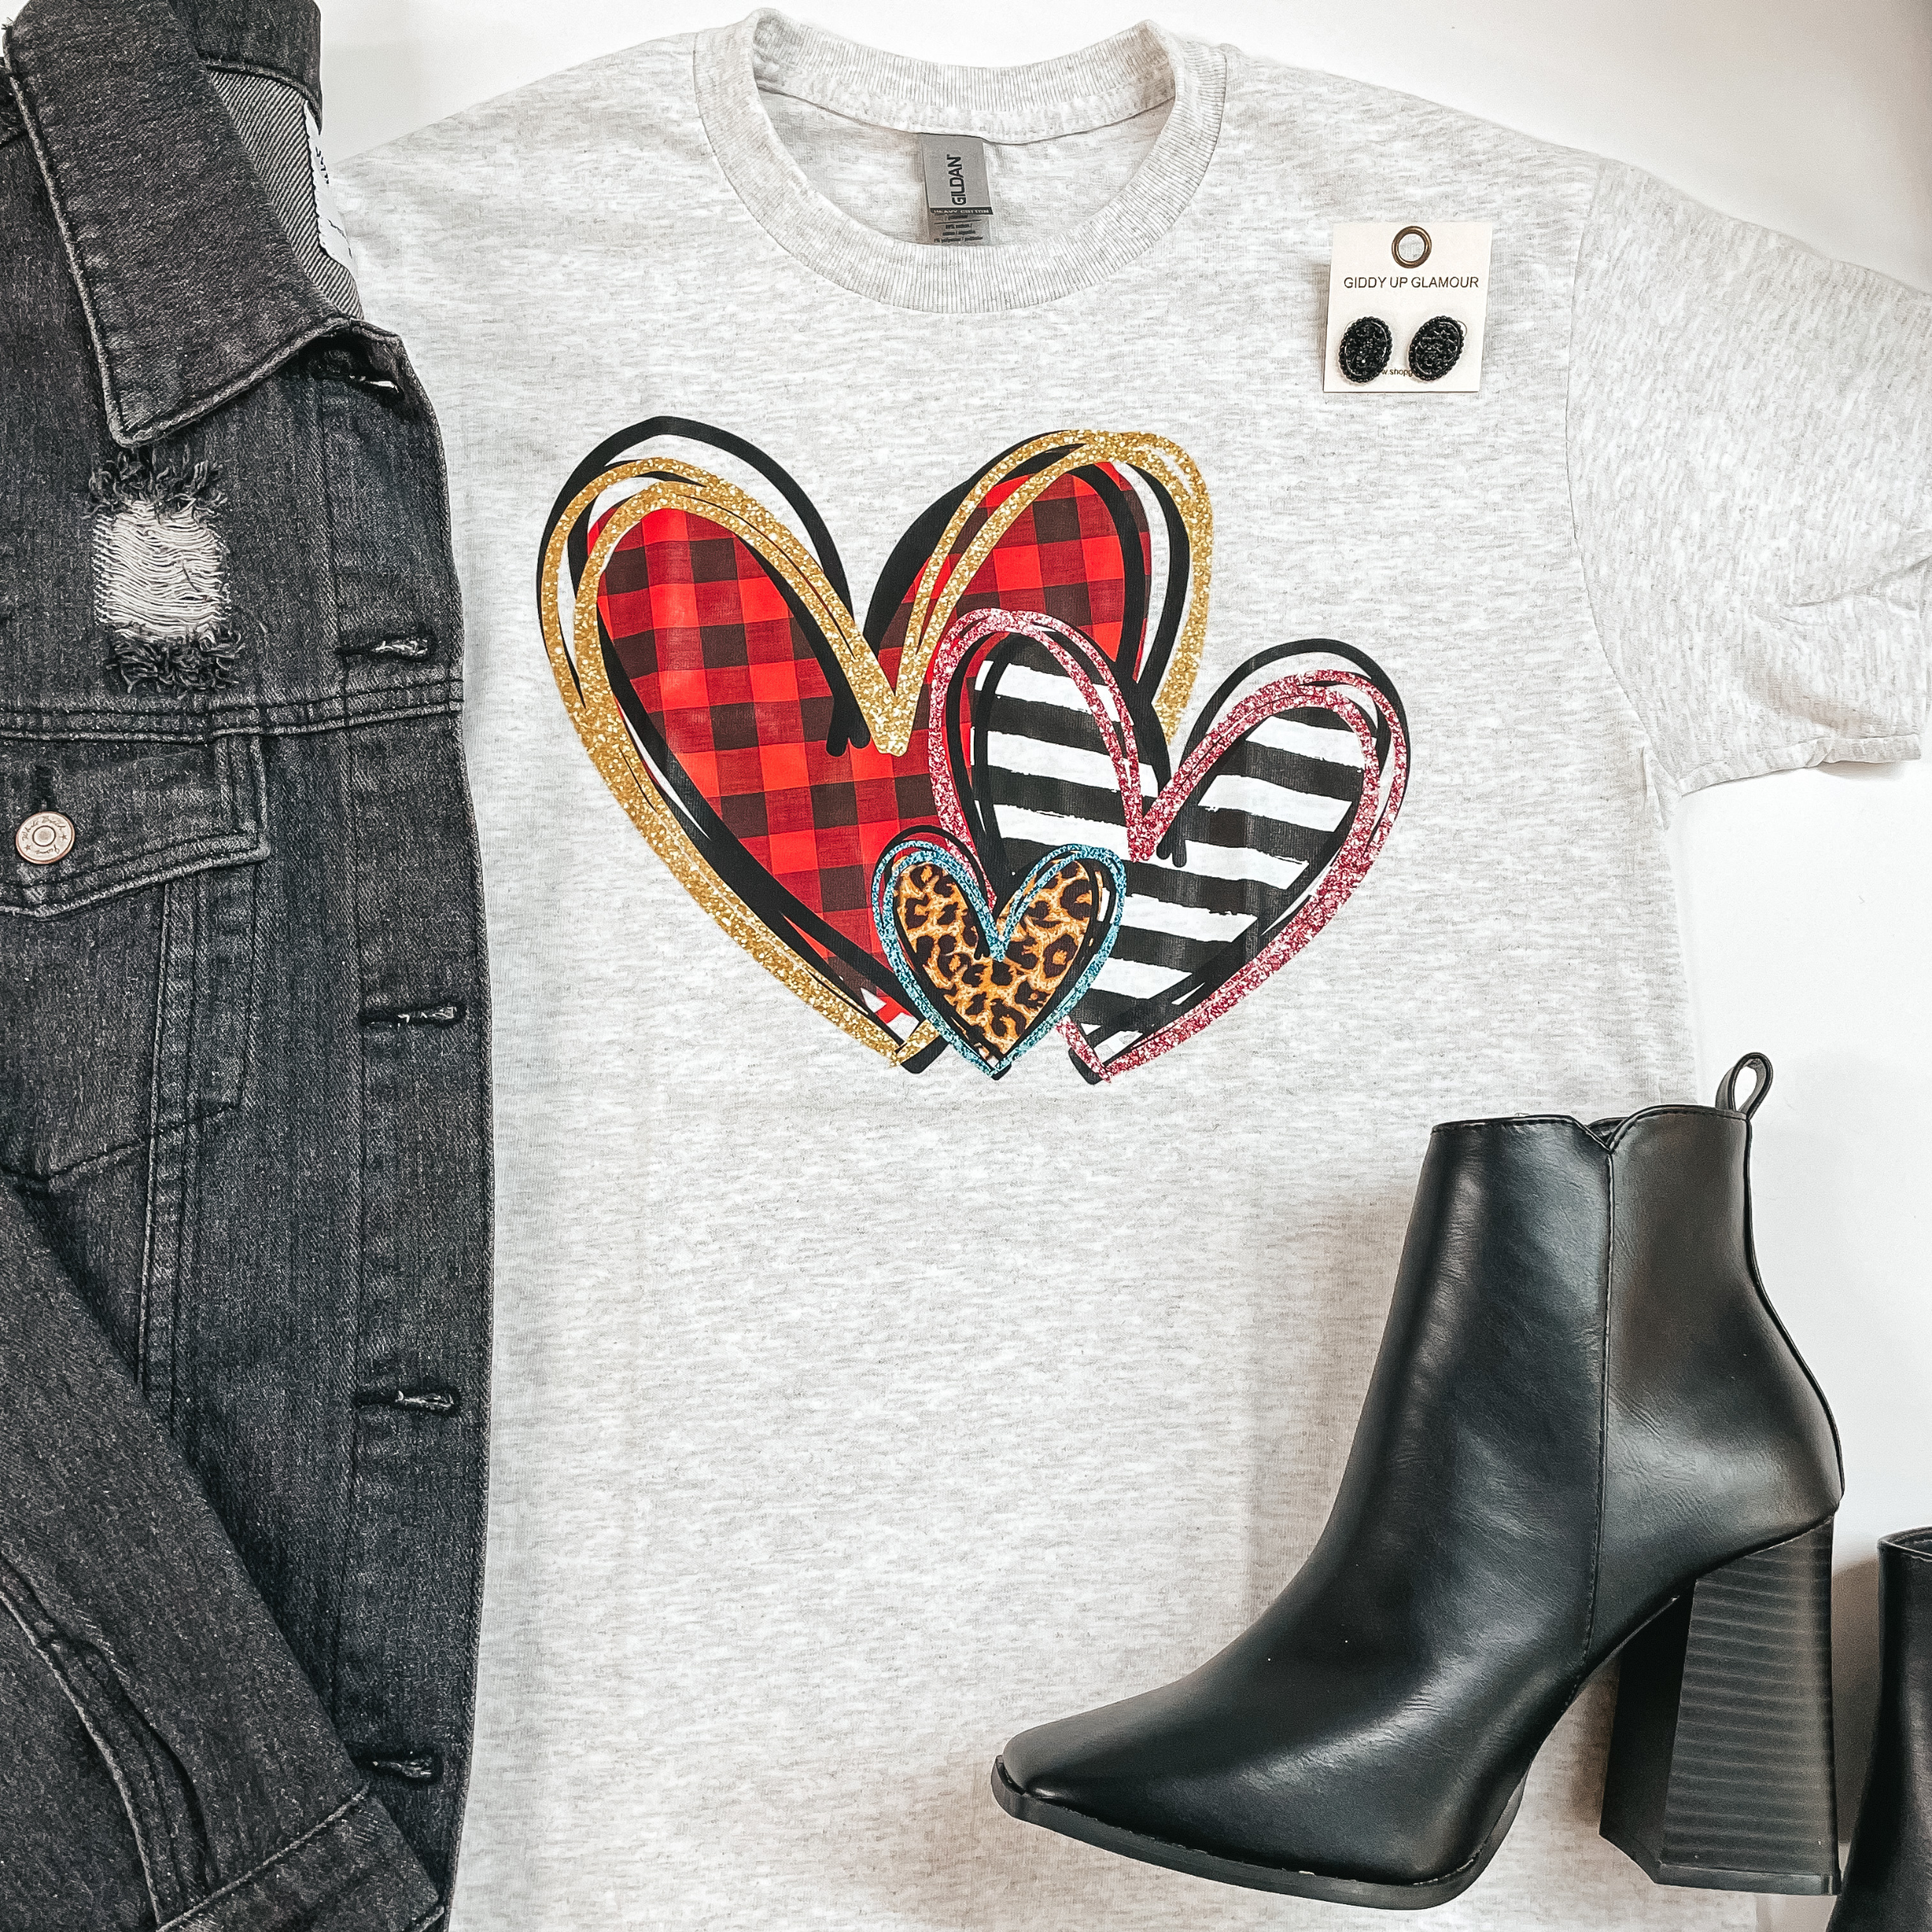 A gray tee with three various sized hearts in the middle with designs including: red buffalo plaid, black and white stripes, and cheetah. Pictured on the left is a black denim jacket and to the right is black booties. 